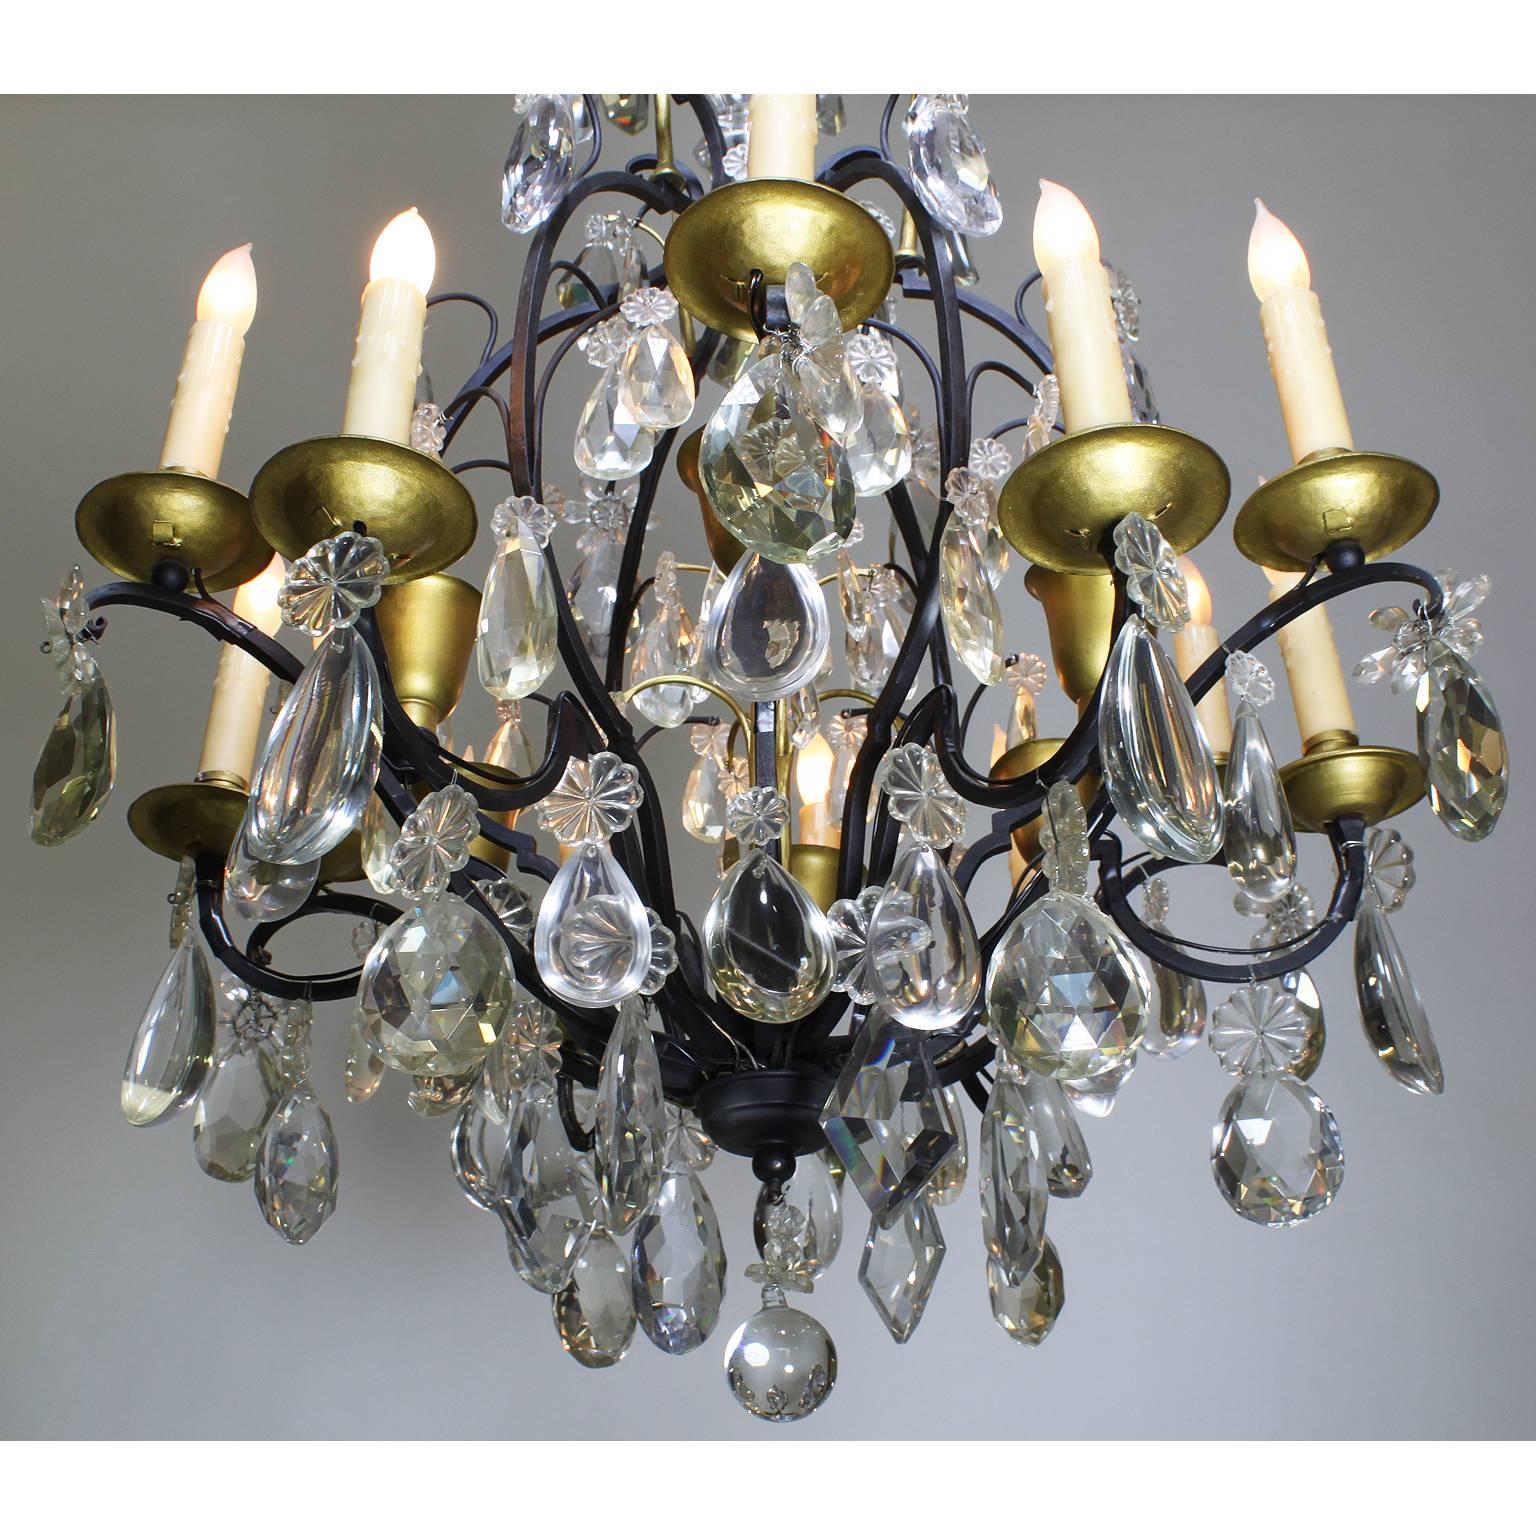 Early 20th Century 19th-20th Century Louis XV Style Wrought Iron Eighteen-Light Crystal Chandelier For Sale